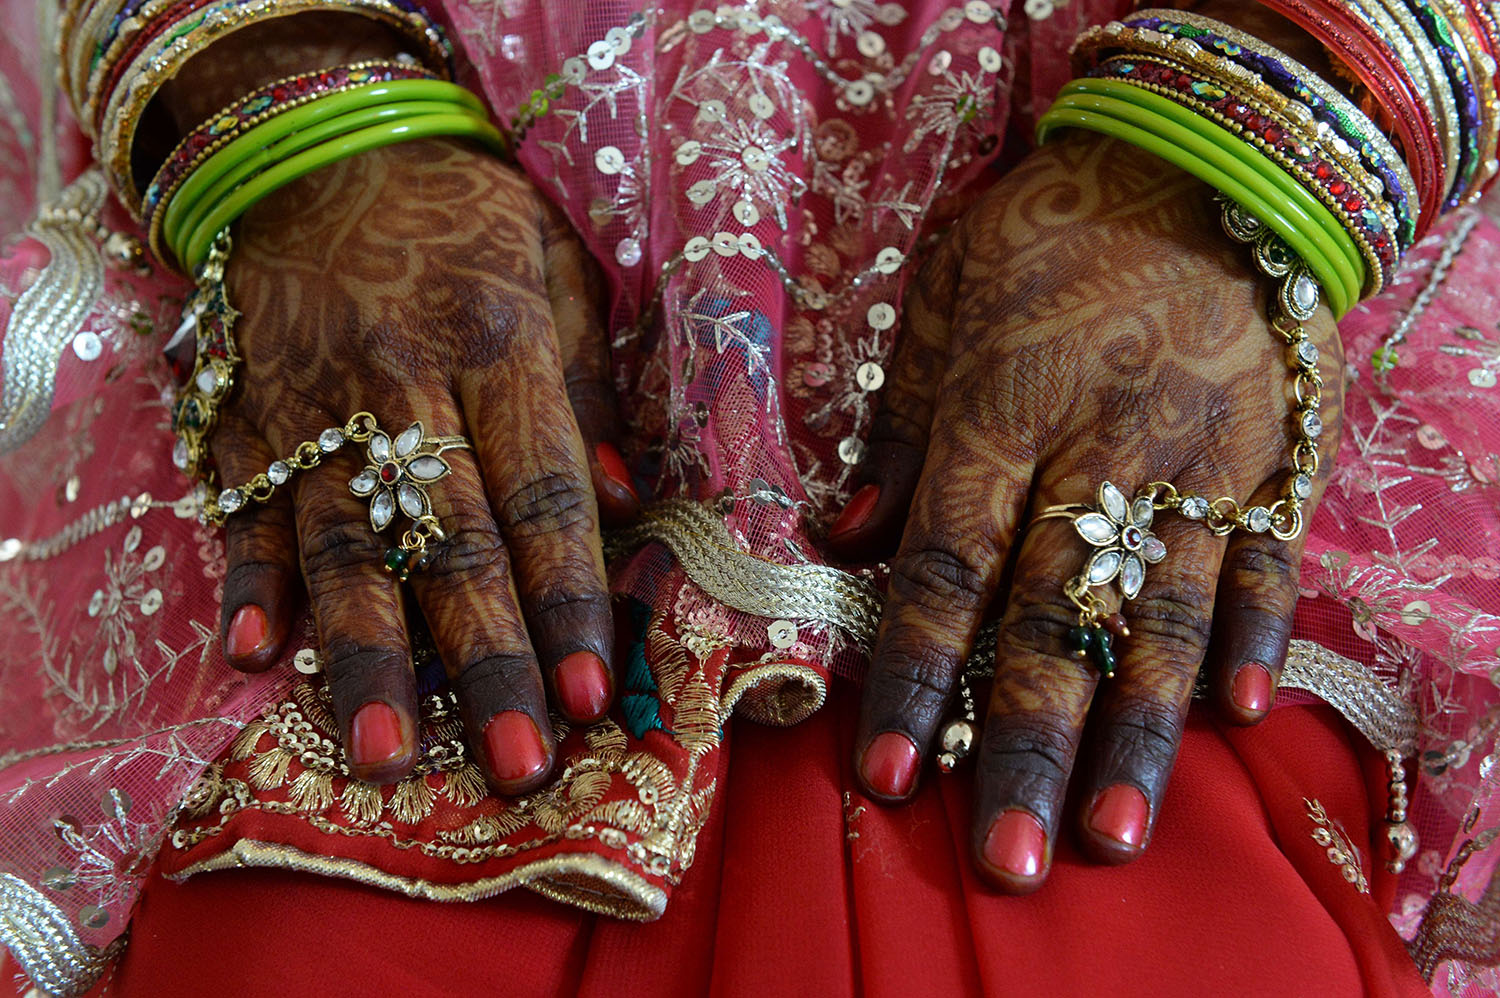 Mar. 3, 2014. An Indian bride in traditional attire sits as she takes part in a mass marriage ceremony at a local temple in the old quarters of New Delhi.